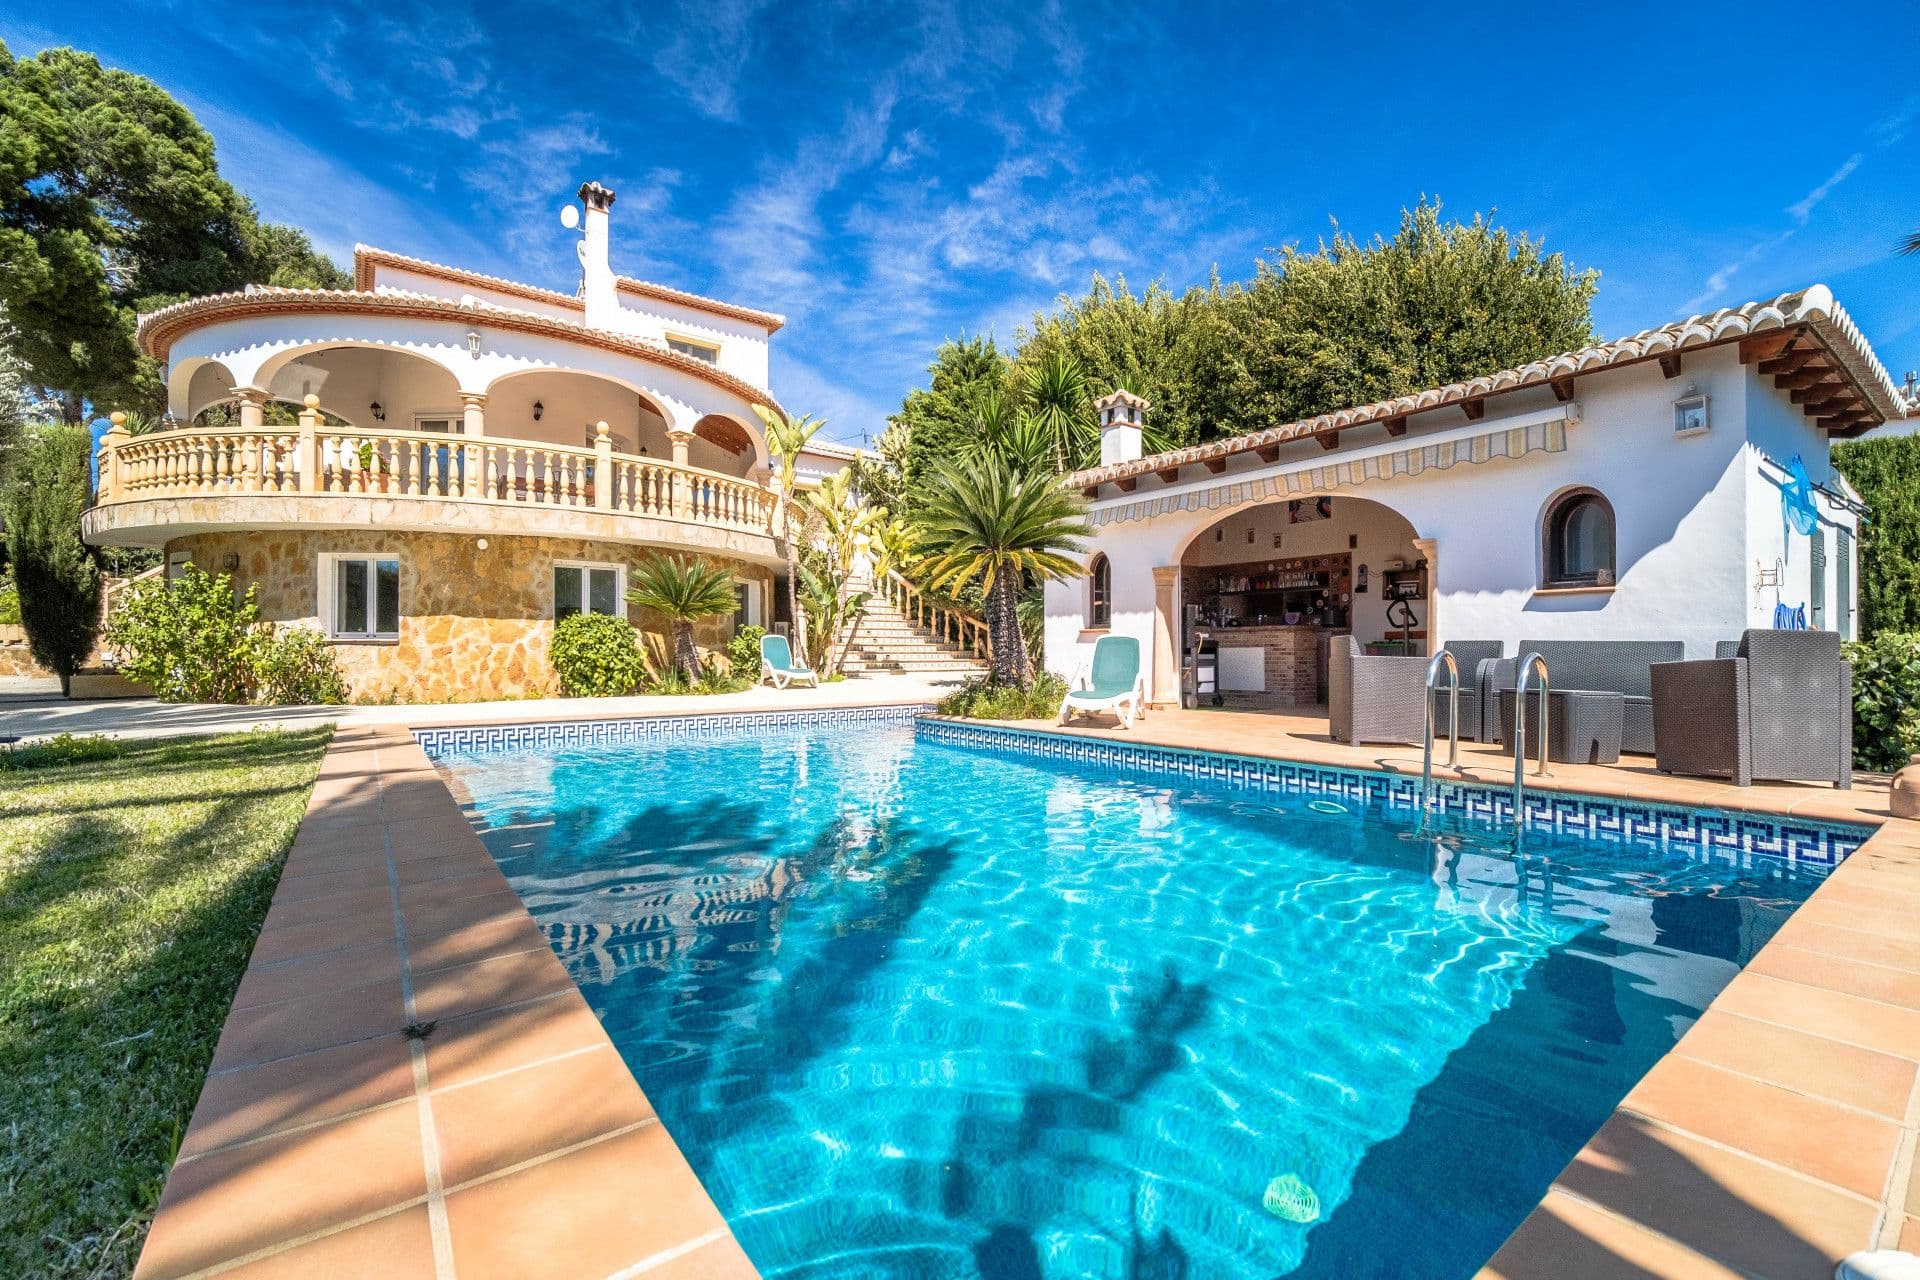 Exclusive Mediterranean-style villa a short distance away from the beach in Portichol, Jávea.